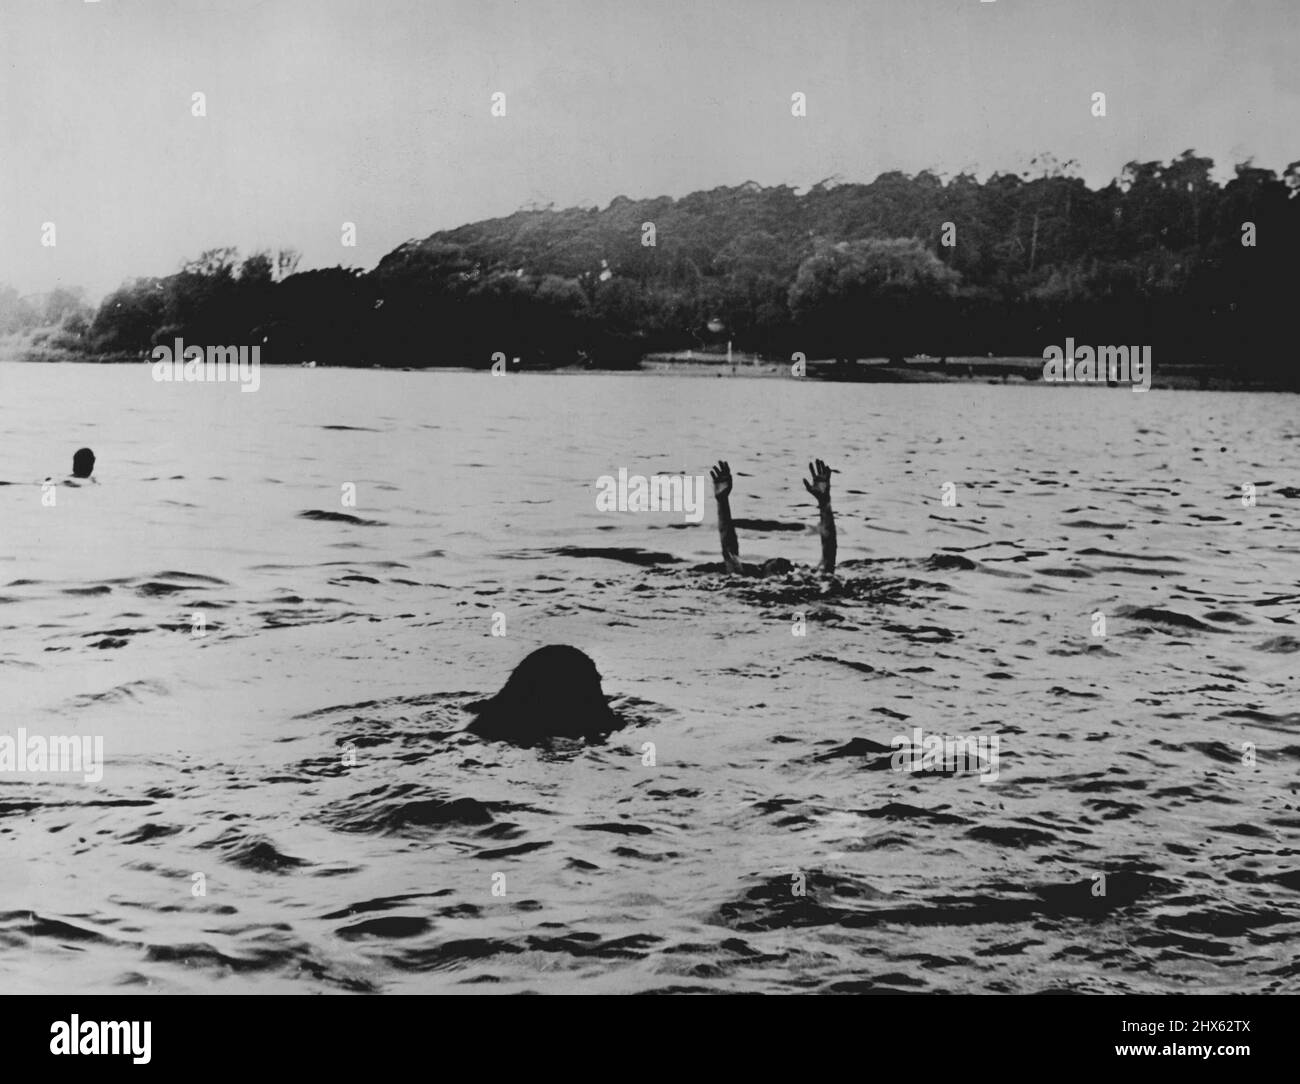 ***** but the arms of the drowning person appears above ***** but help is coming. March 21, 1942. (Photo by C. Anders & Co.). Stock Photo